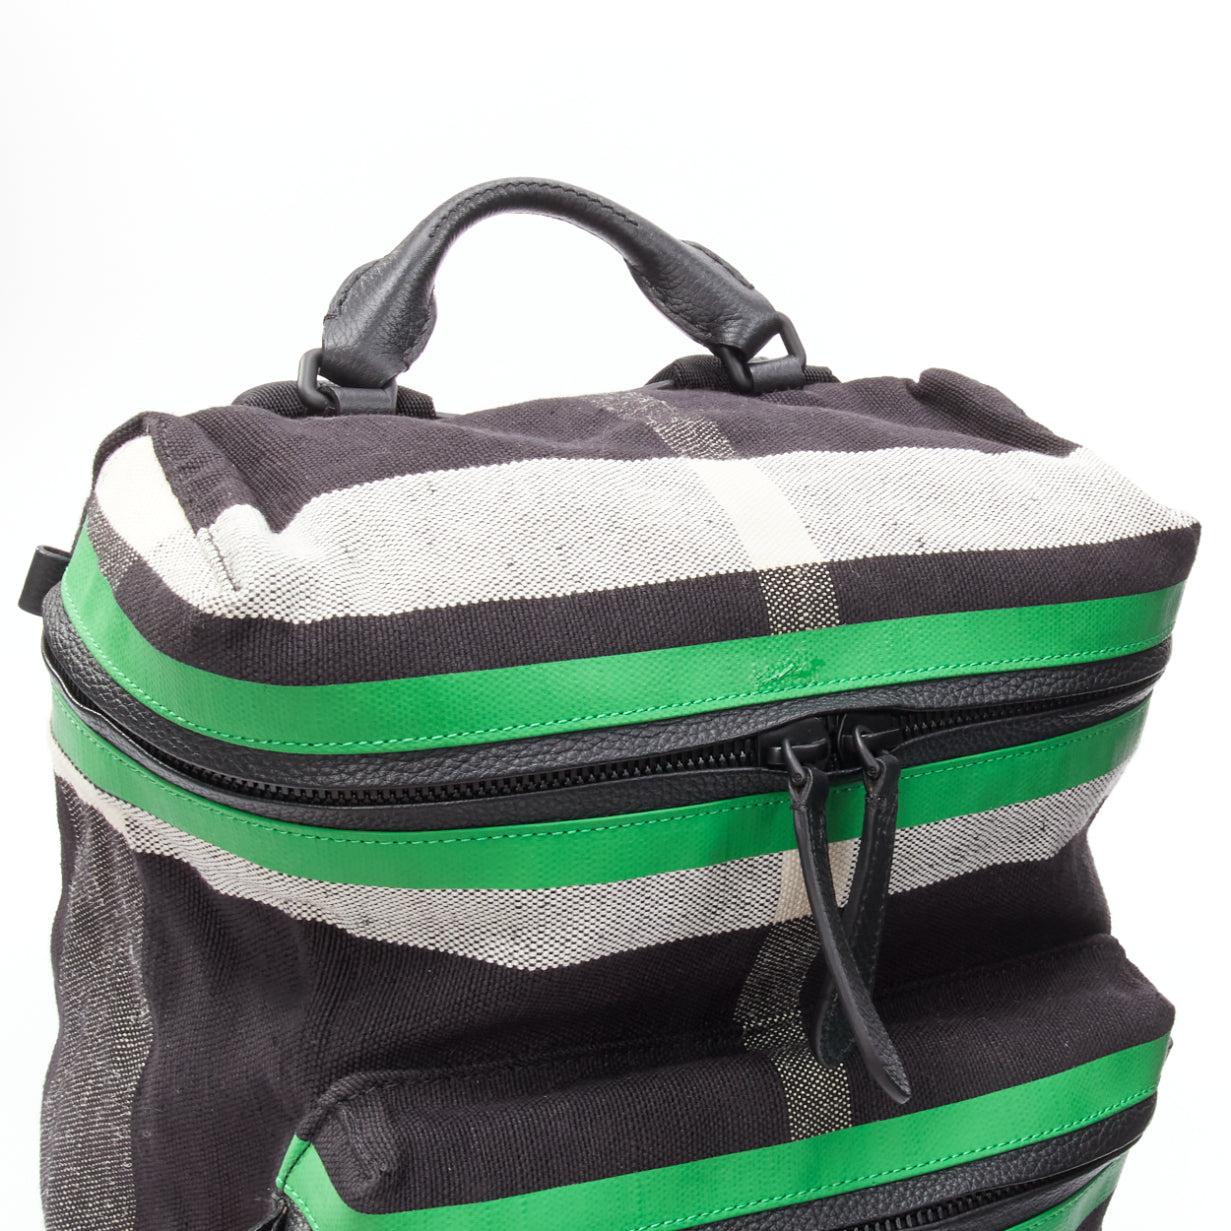 BURBERRY Donny House Check green black fabric leather trim backpack bag 2